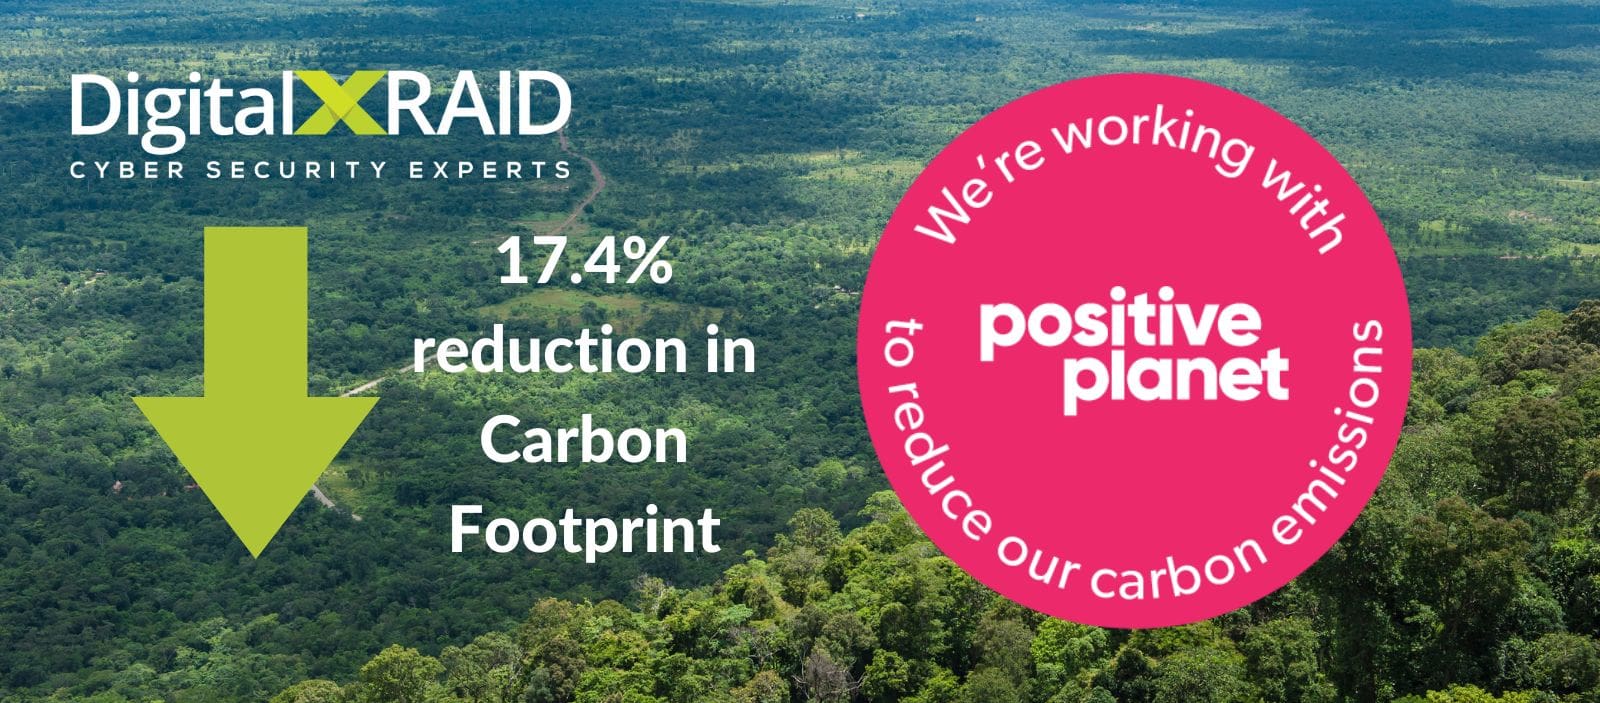 DigitalXRAID Carbon footprint reduction 2023 featured image